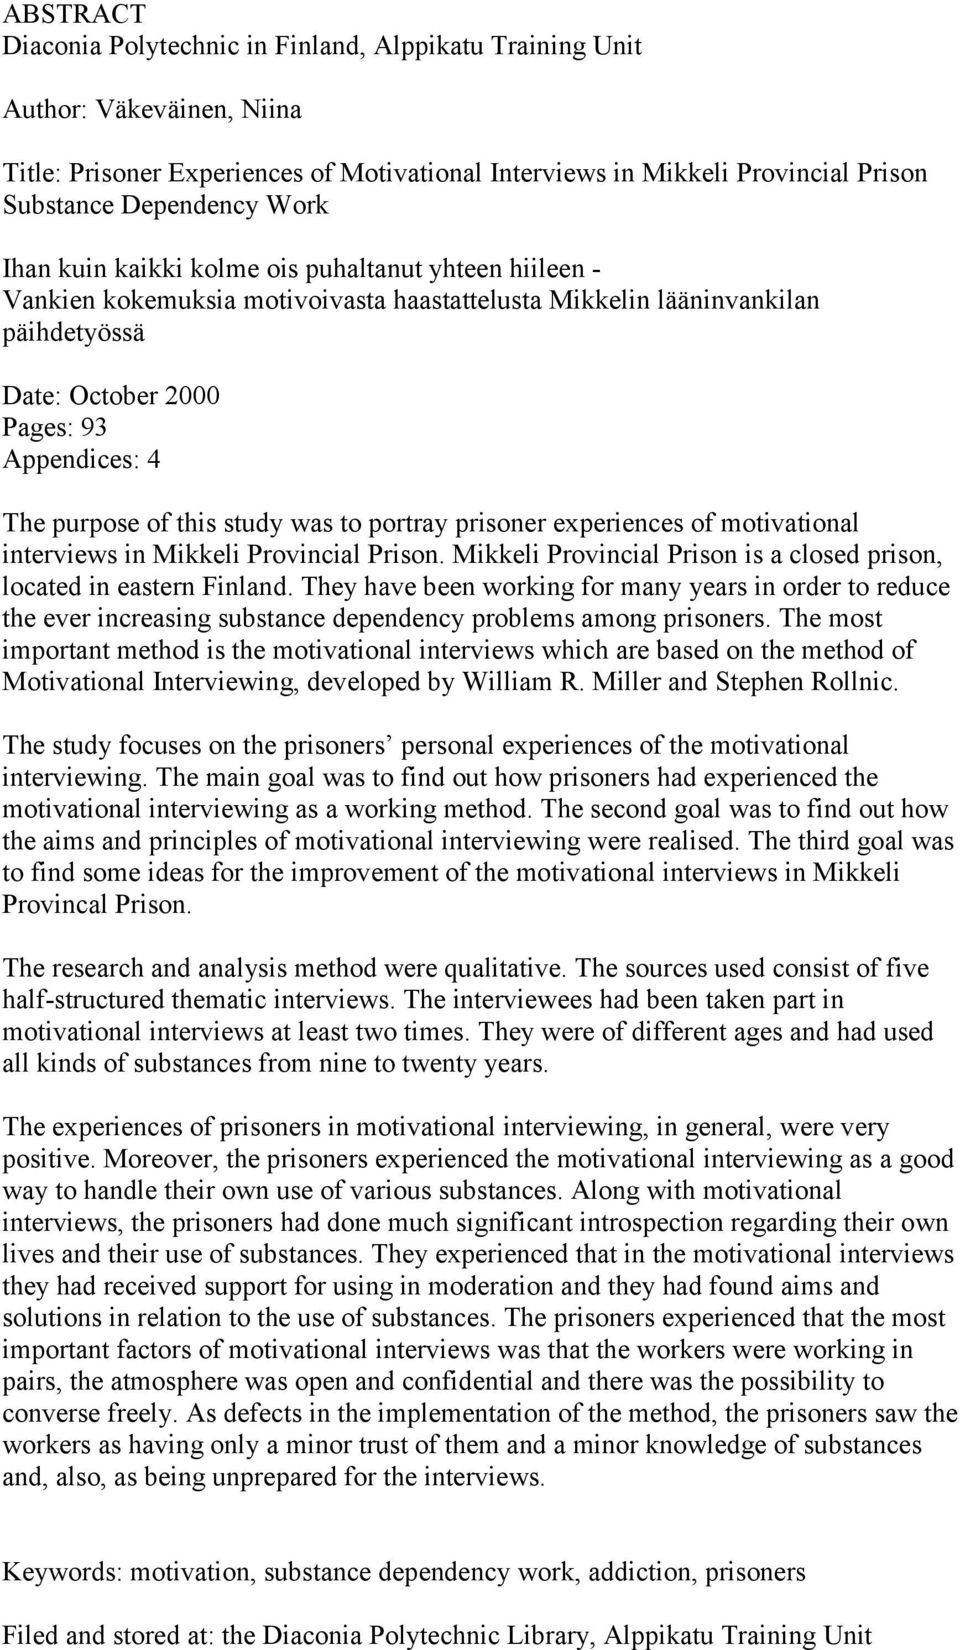 of this study was to portray prisoner experiences of motivational interviews in Mikkeli Provincial Prison. Mikkeli Provincial Prison is a closed prison, located in eastern Finland.